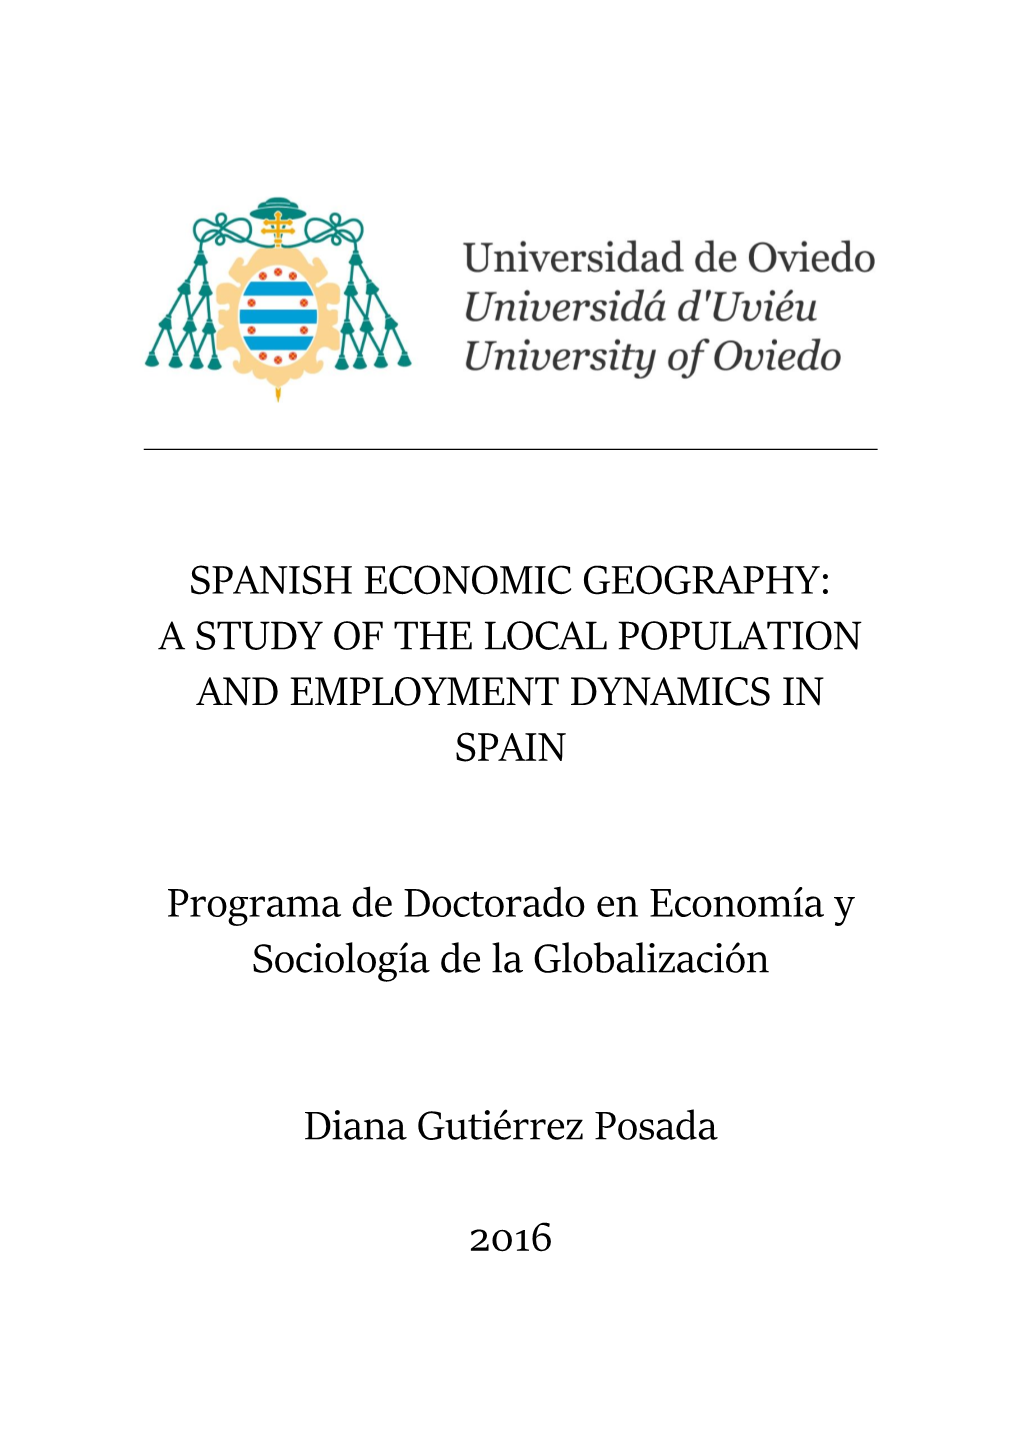 Spanish Economic Geography: a Study of the Local Population and Employment Dynamics in Spain